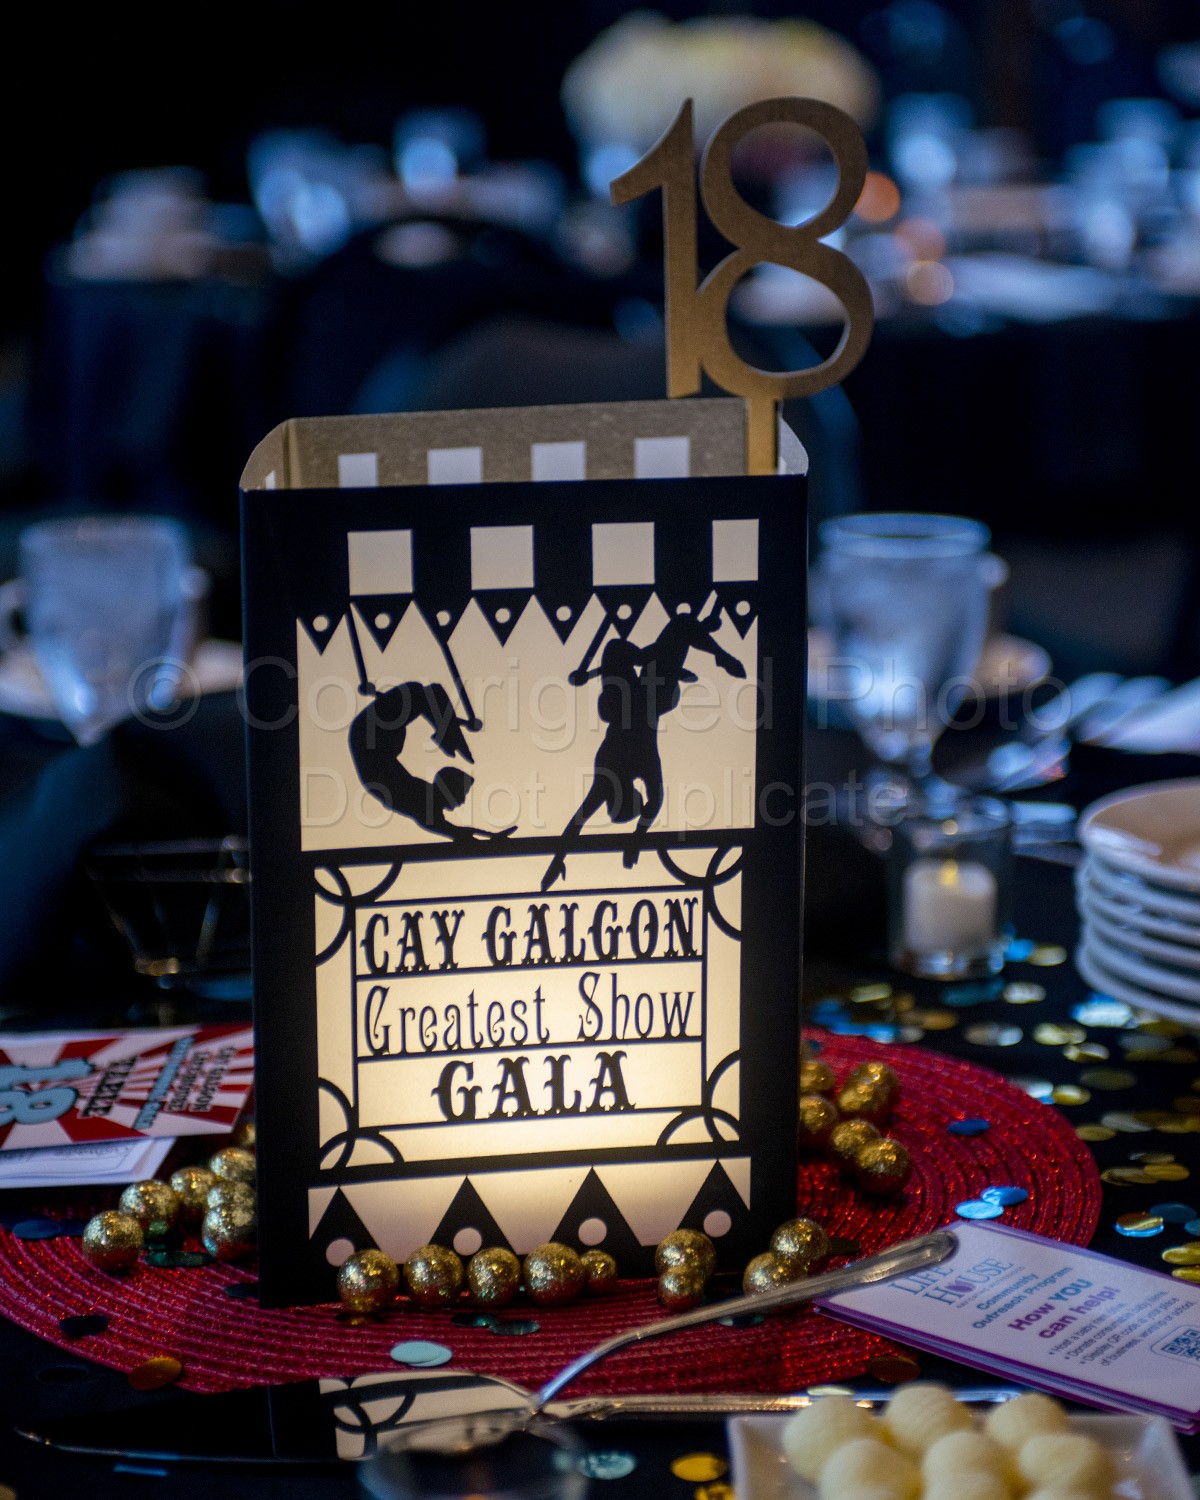 Under The Big Top - Cay Galgon's Lifehouse Annual Gala